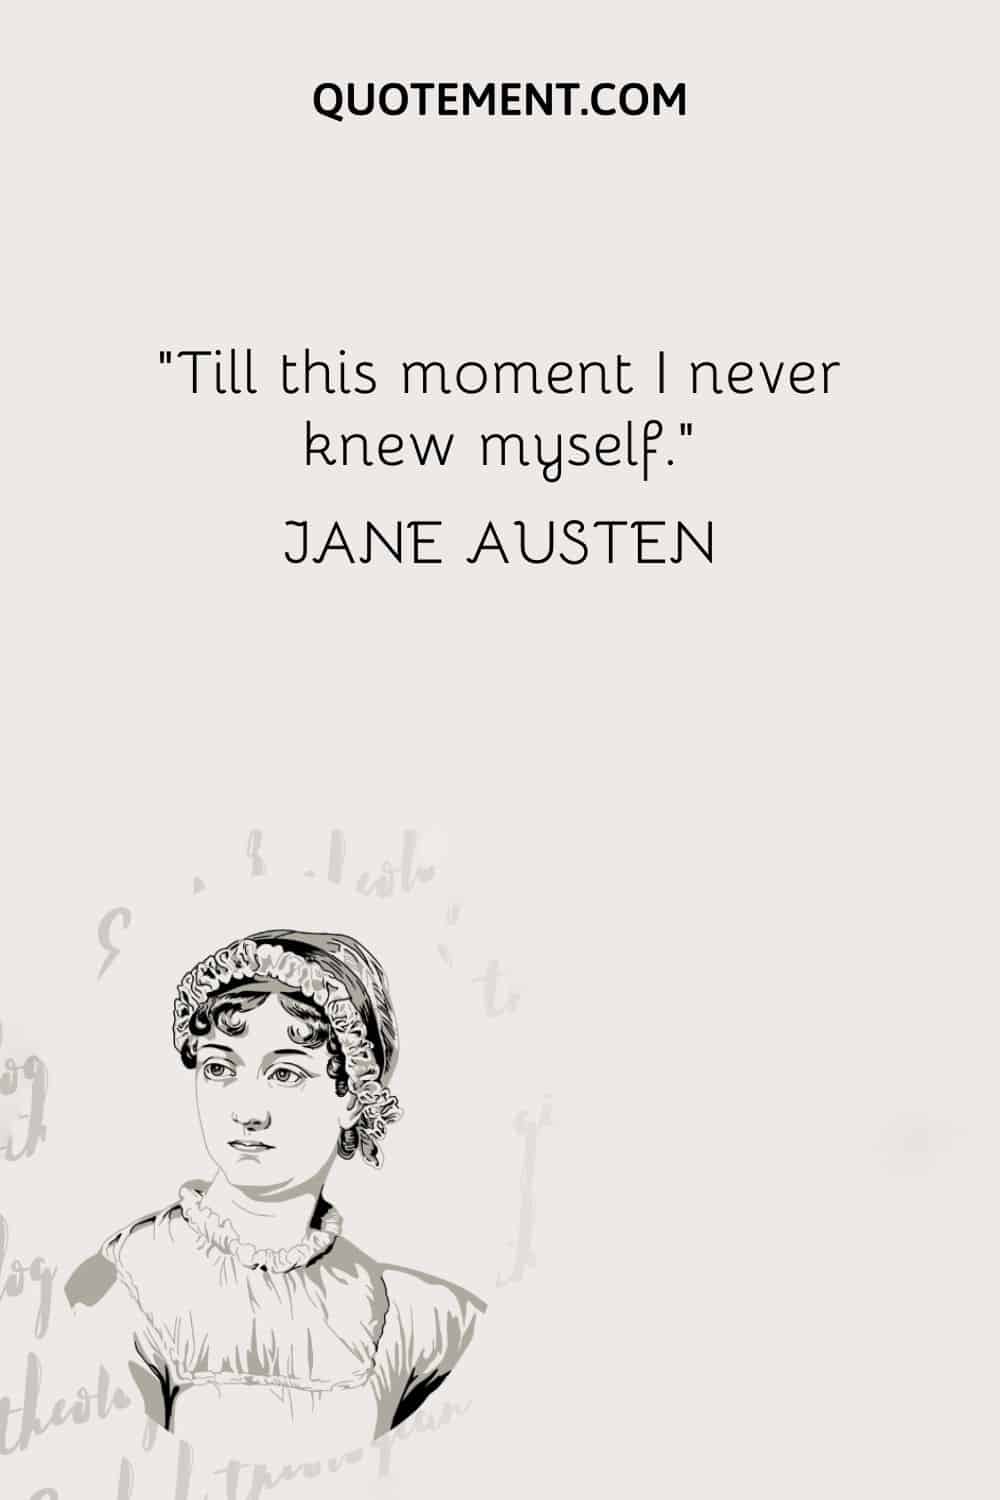 image of Elizabeth Bennet representing the best quote from pride and prejudice